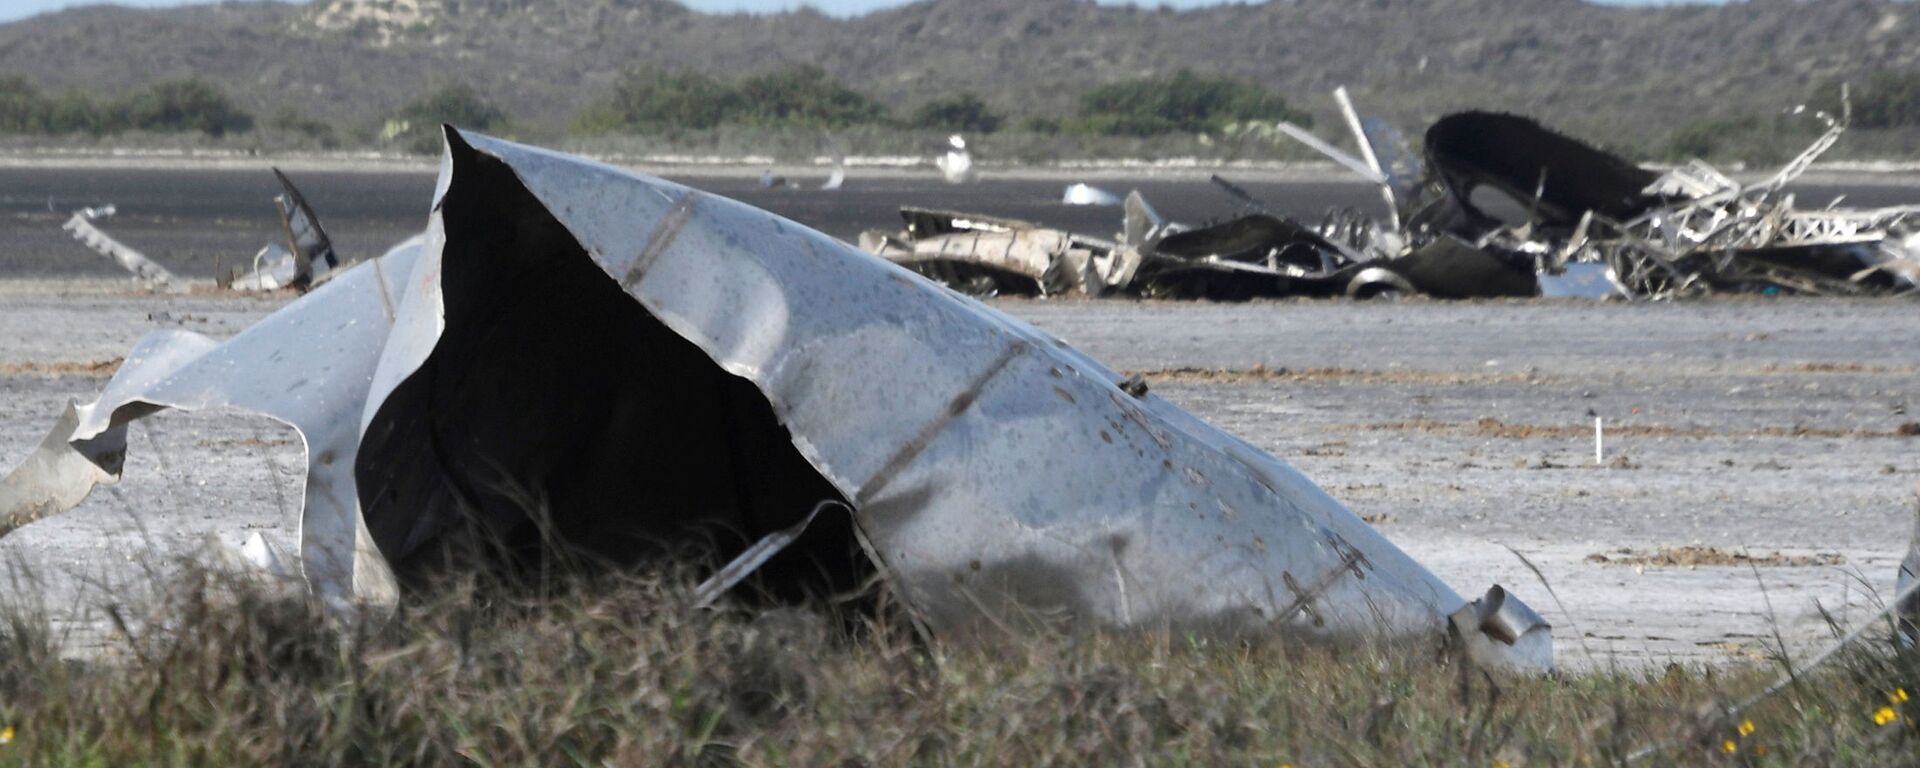 Debris is seen in a National Wildlife Refuge after uncrewed SpaceX Starship prototype rocket SN11 failed to land safely, in Boca Chica, Texas, U.S. March 31,2021.  - Sputnik International, 1920, 01.04.2021